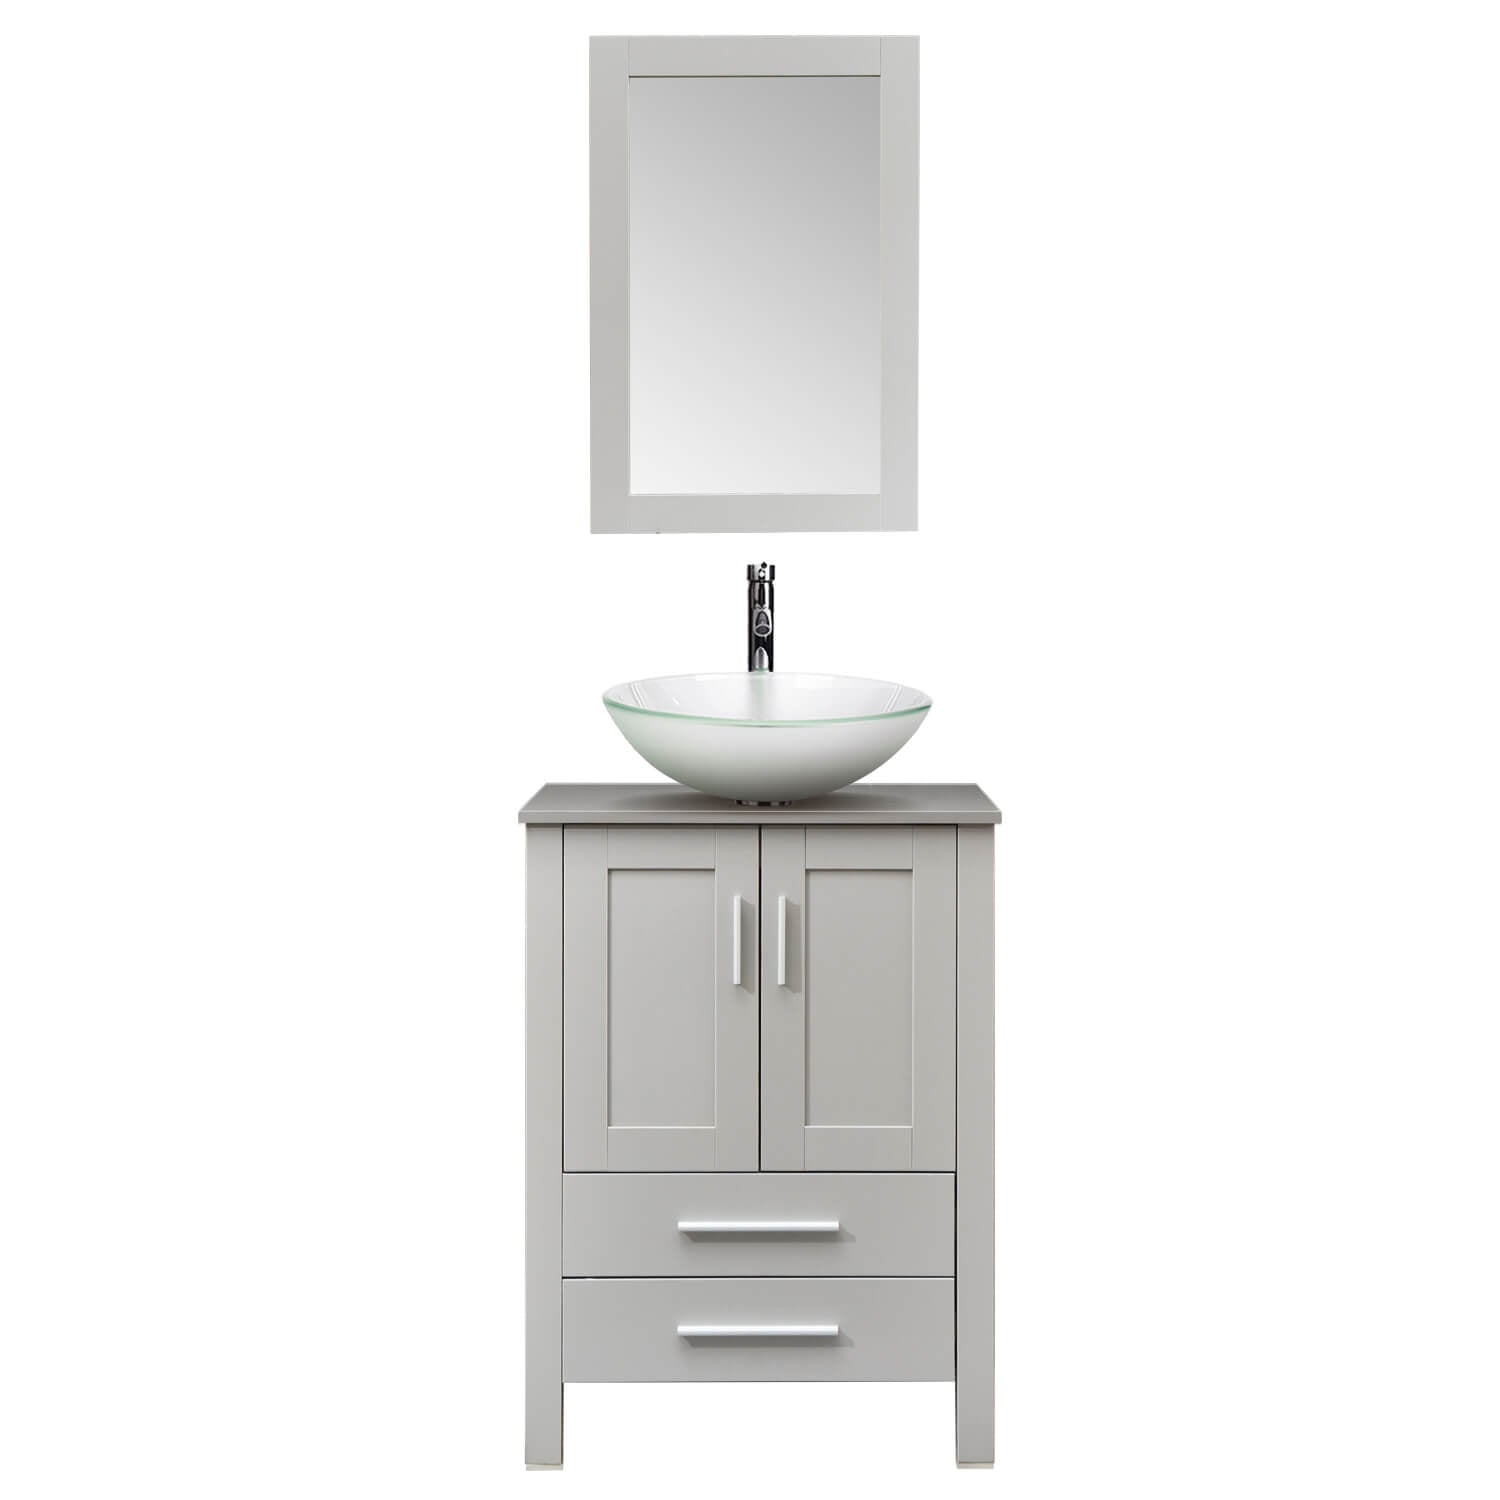 Elecwish gray wood bathroom vanity with frosted glass sink BA20103 in white background